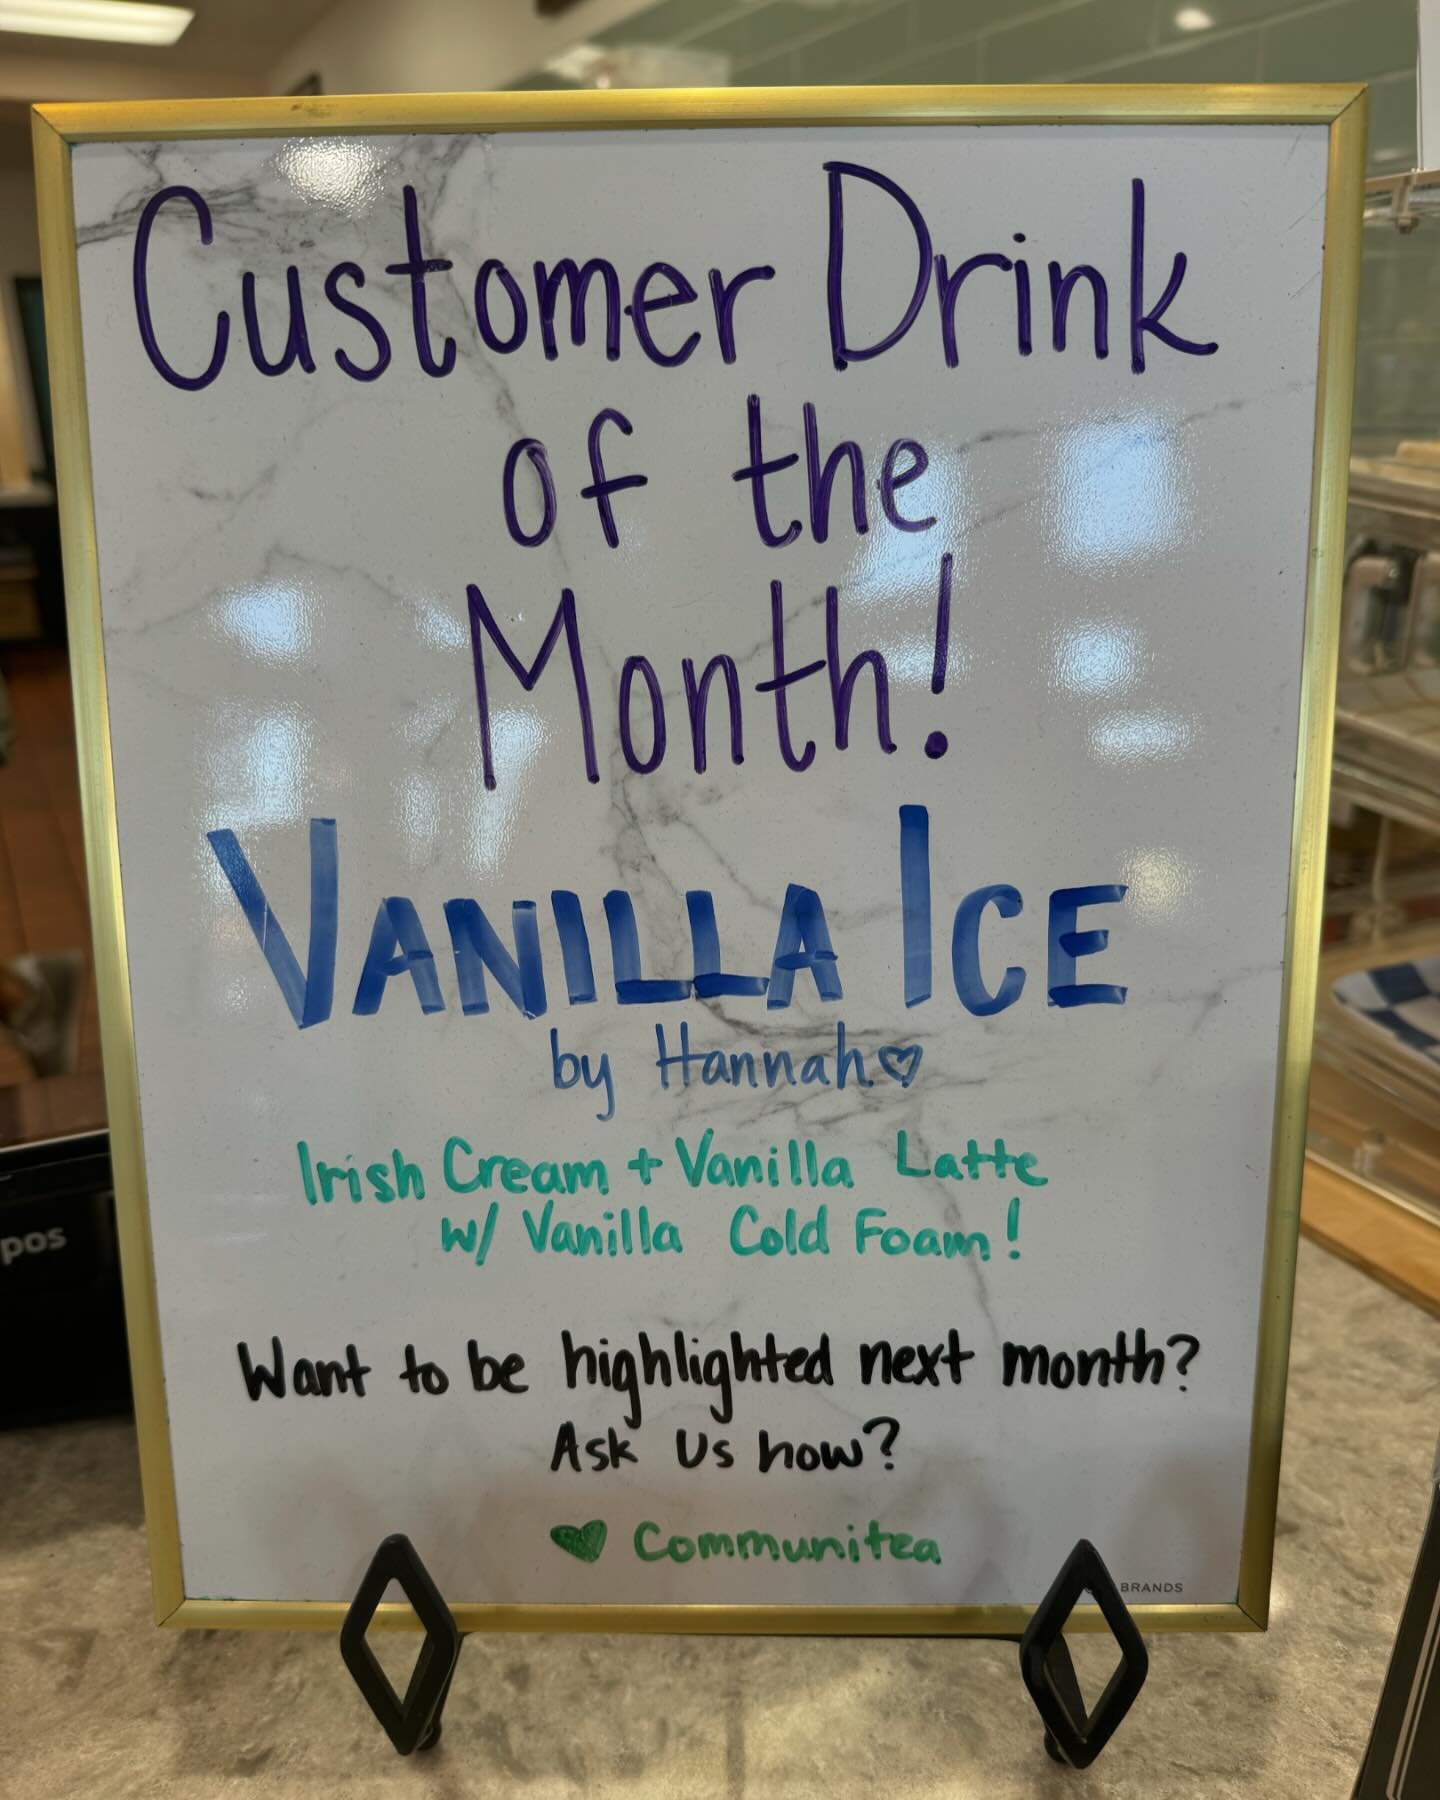 It&rsquo;s gonna be May!!! We need a new drink of the month.
Hannah&rsquo;s Vanilla Ice was bomb but it&rsquo;s time for something new. We have a few in the running but wonder what you have up your sleeve! What&rsquo;s your favorite drink or a drink 